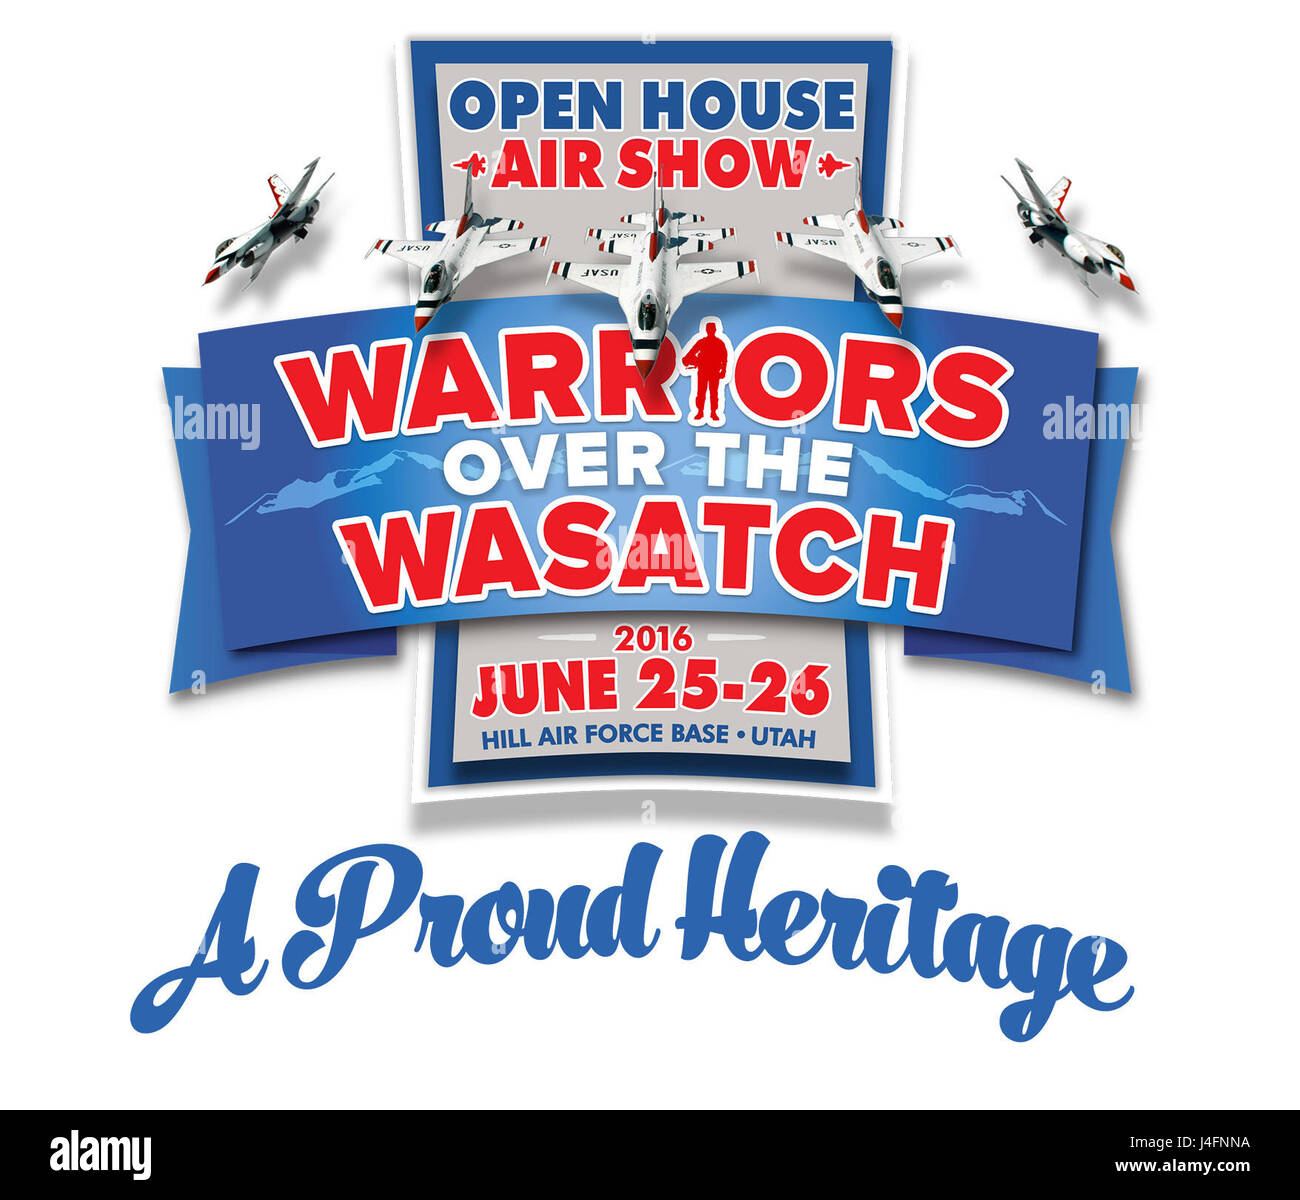 The 2016 Hill Air Force Base Warriors Over the Wasatch open house and air show, to be held June 25-26, 2016, was to play host to 600,000 visitors. A wide reaching marketing plan was developed to advertise this huge event and air show logo was designed, branding all the print (newspaper, magazine, flyers posters), social media, television, public transportation (UTA buses and trains) and billboard advertising. The two-day show included precision flying acts like the U.S. Air Force Thunderbirds, the U.S. Army Golden Knights, Breitling Jet Team and other spectacular civilian aerial performers and Stock Photo